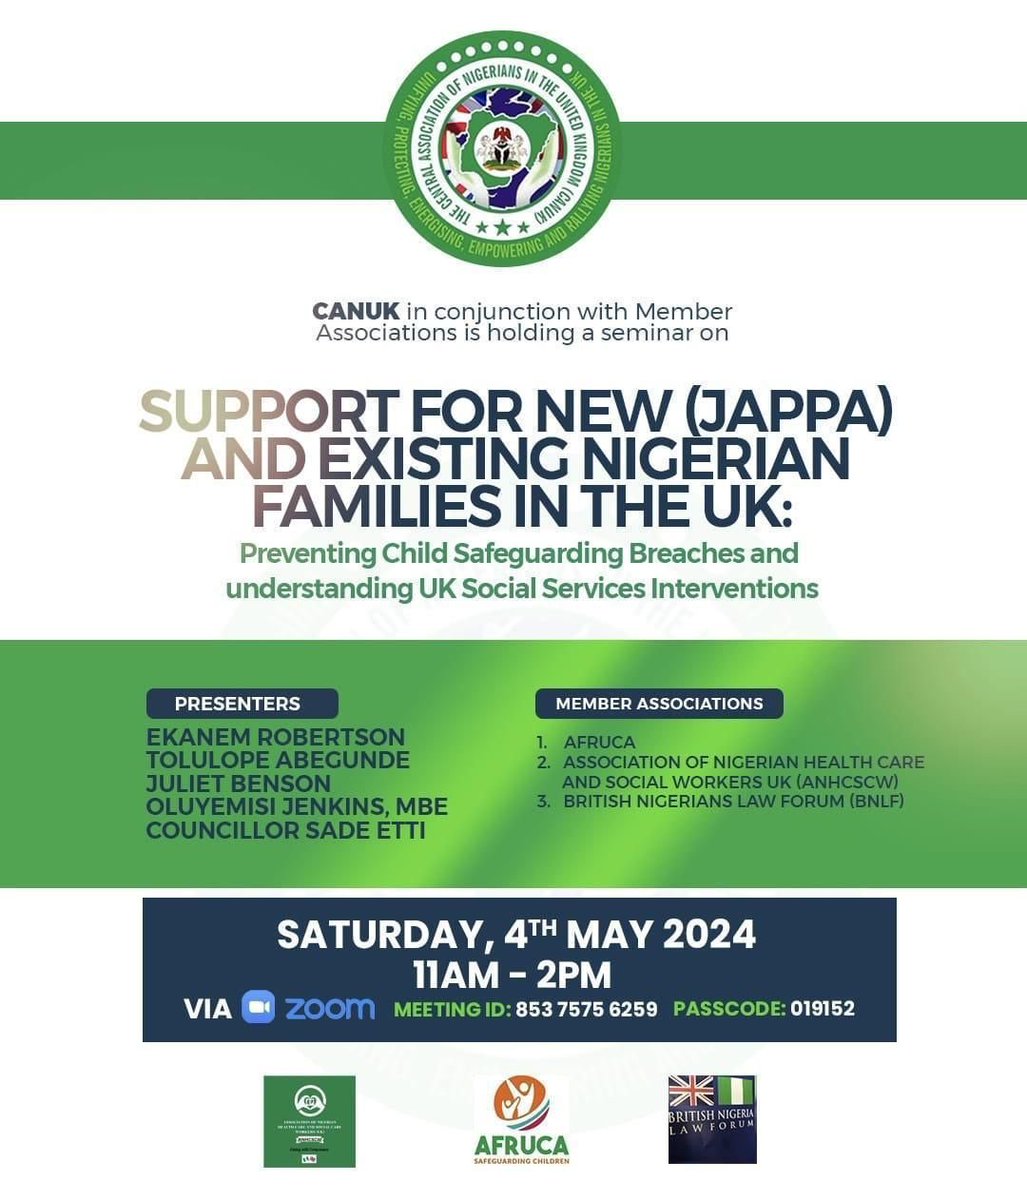 Ongoing! Our joint Parenting Seminar with CANUK on ZOOM Support for Japa and Existing Nigerian Families in the UK: Preventing Child Safeguarding Breaches and understanding UK Social Services Interventions Meeting ID: 853 7575 6259 Passcode: 019152 us02web.zoom.us/j/85375756259?…